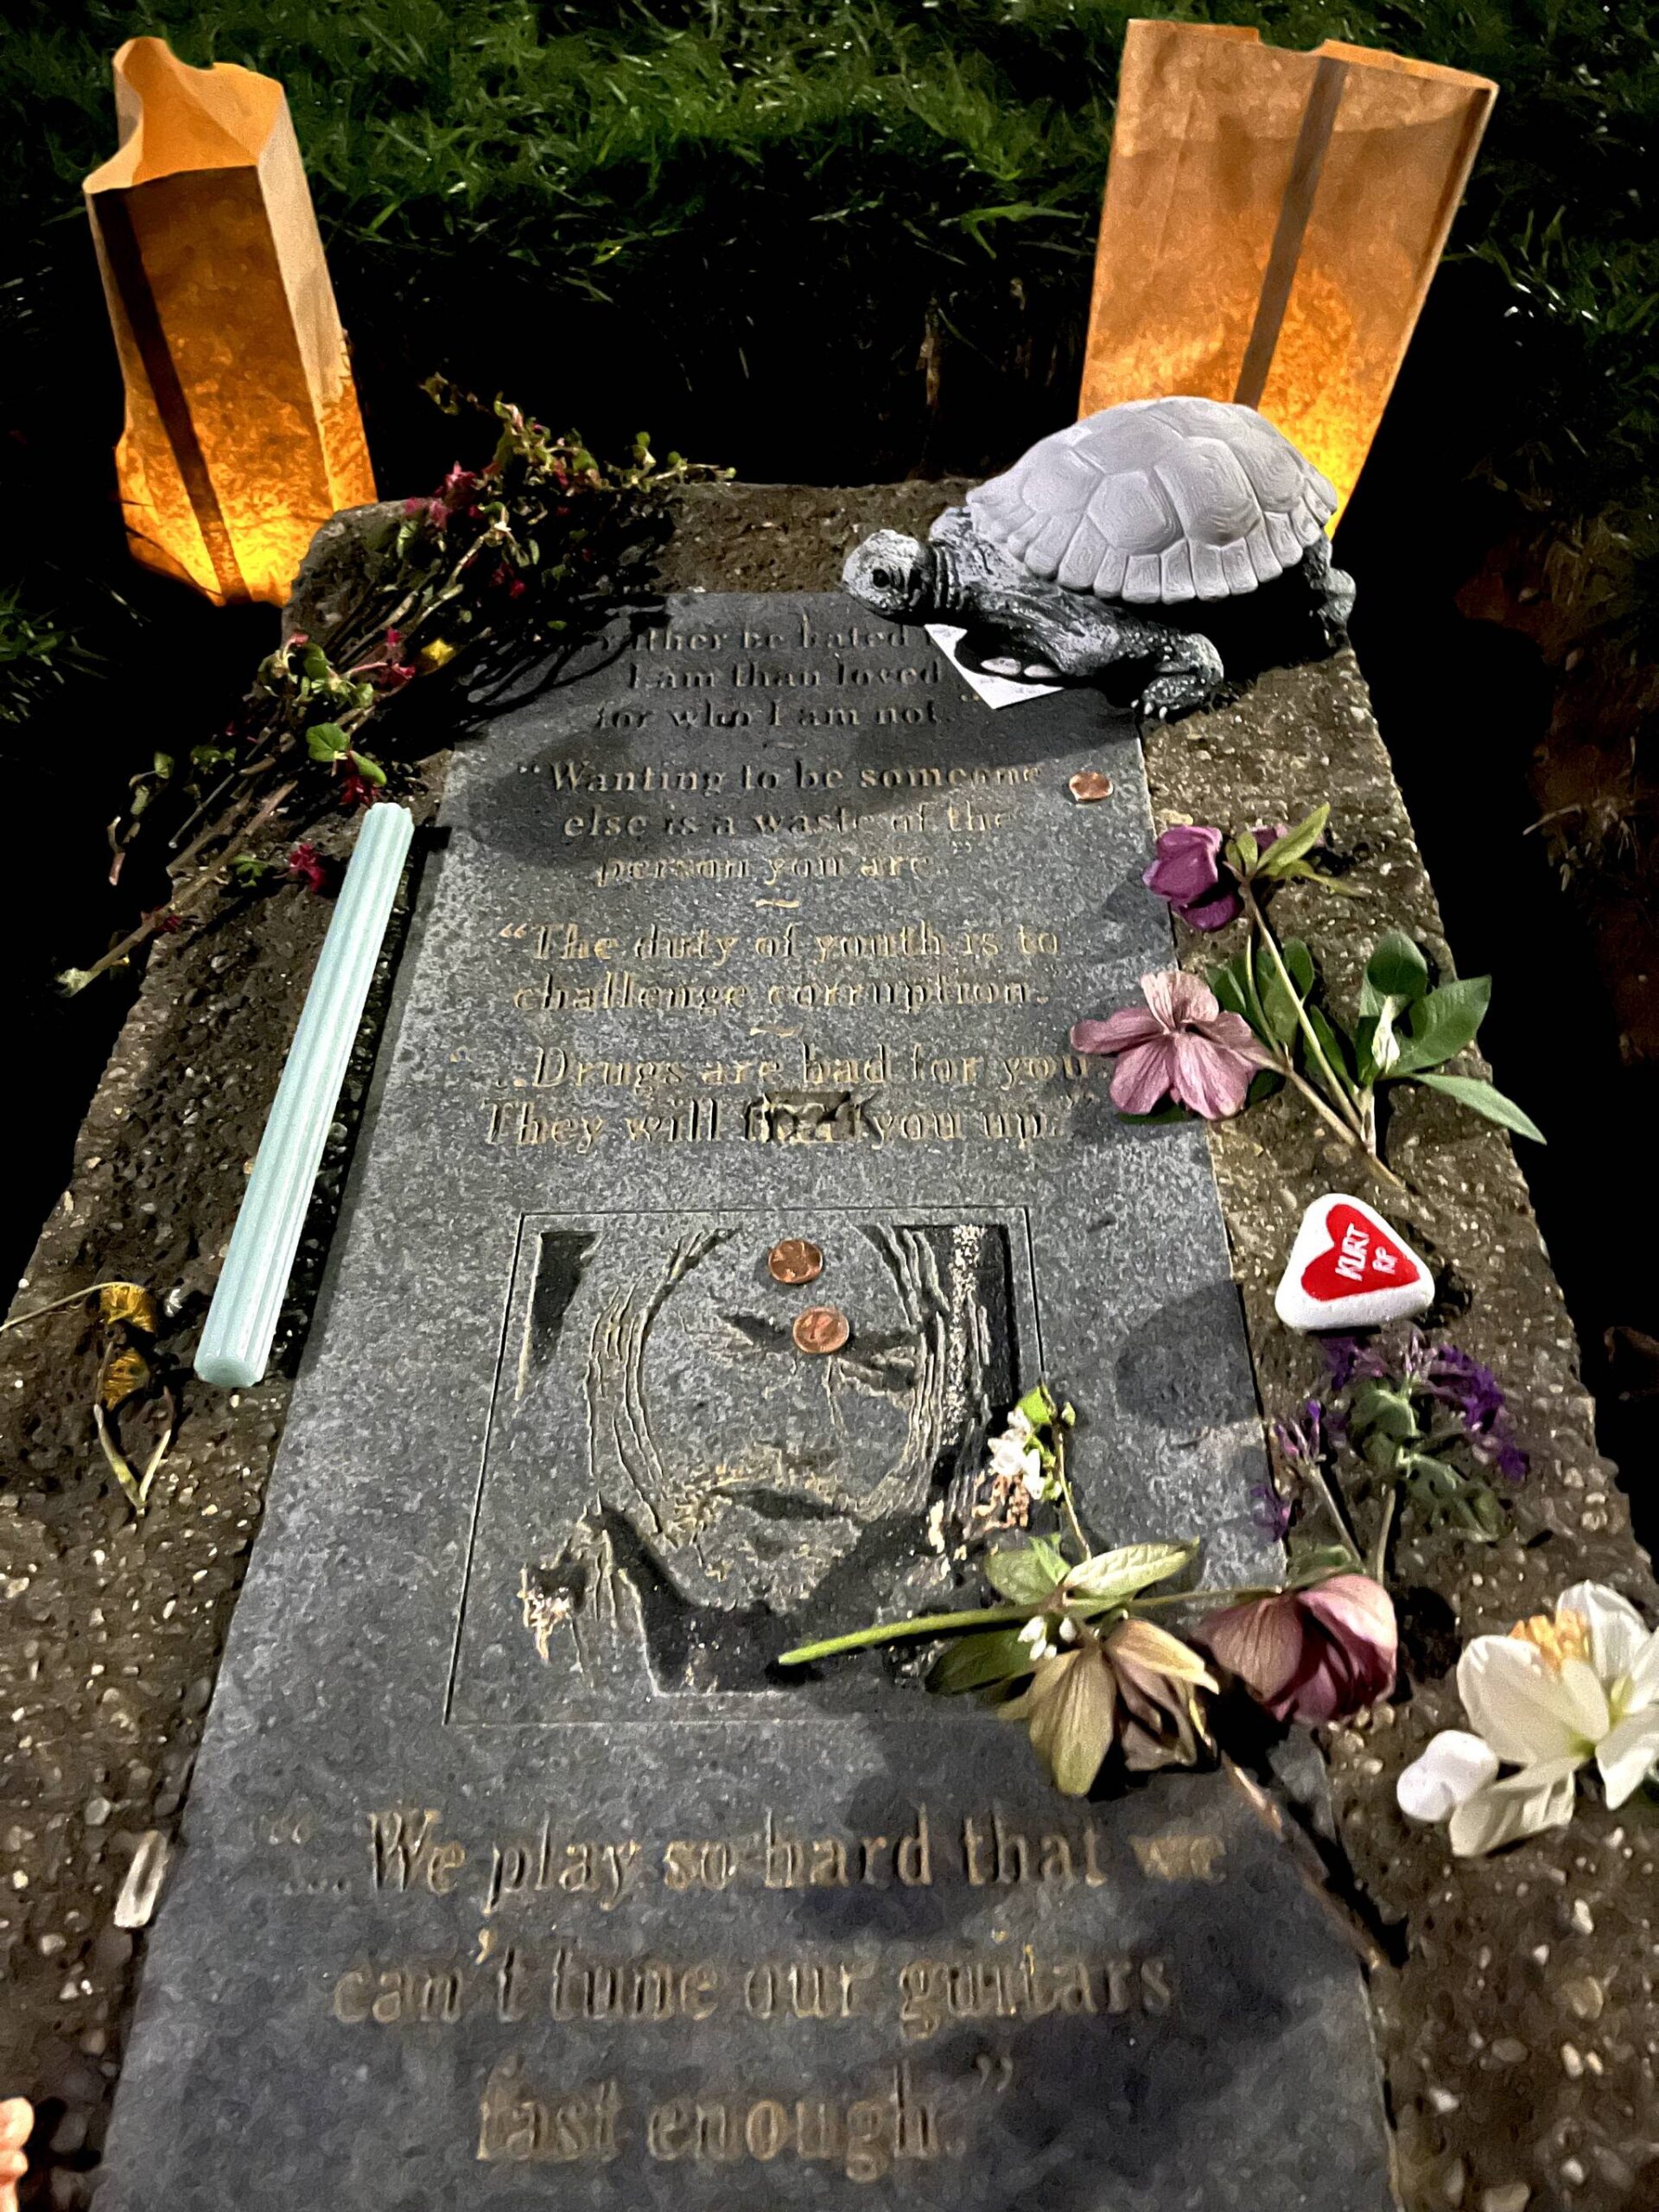 Matthew N. Wells / The Daily World
The polished granite stone includes a few quotes from the late Kurt Cobain. People showed up to Kurt Cobain Memorial Park on Friday night to pay their respects to the musician and to the man he was. One quote on the stone should resonate with those fans who loved Cobain: “Wanting to be someone else is a waste of the person you are,” said Cobain, who was an individual until the end of his shortened life.